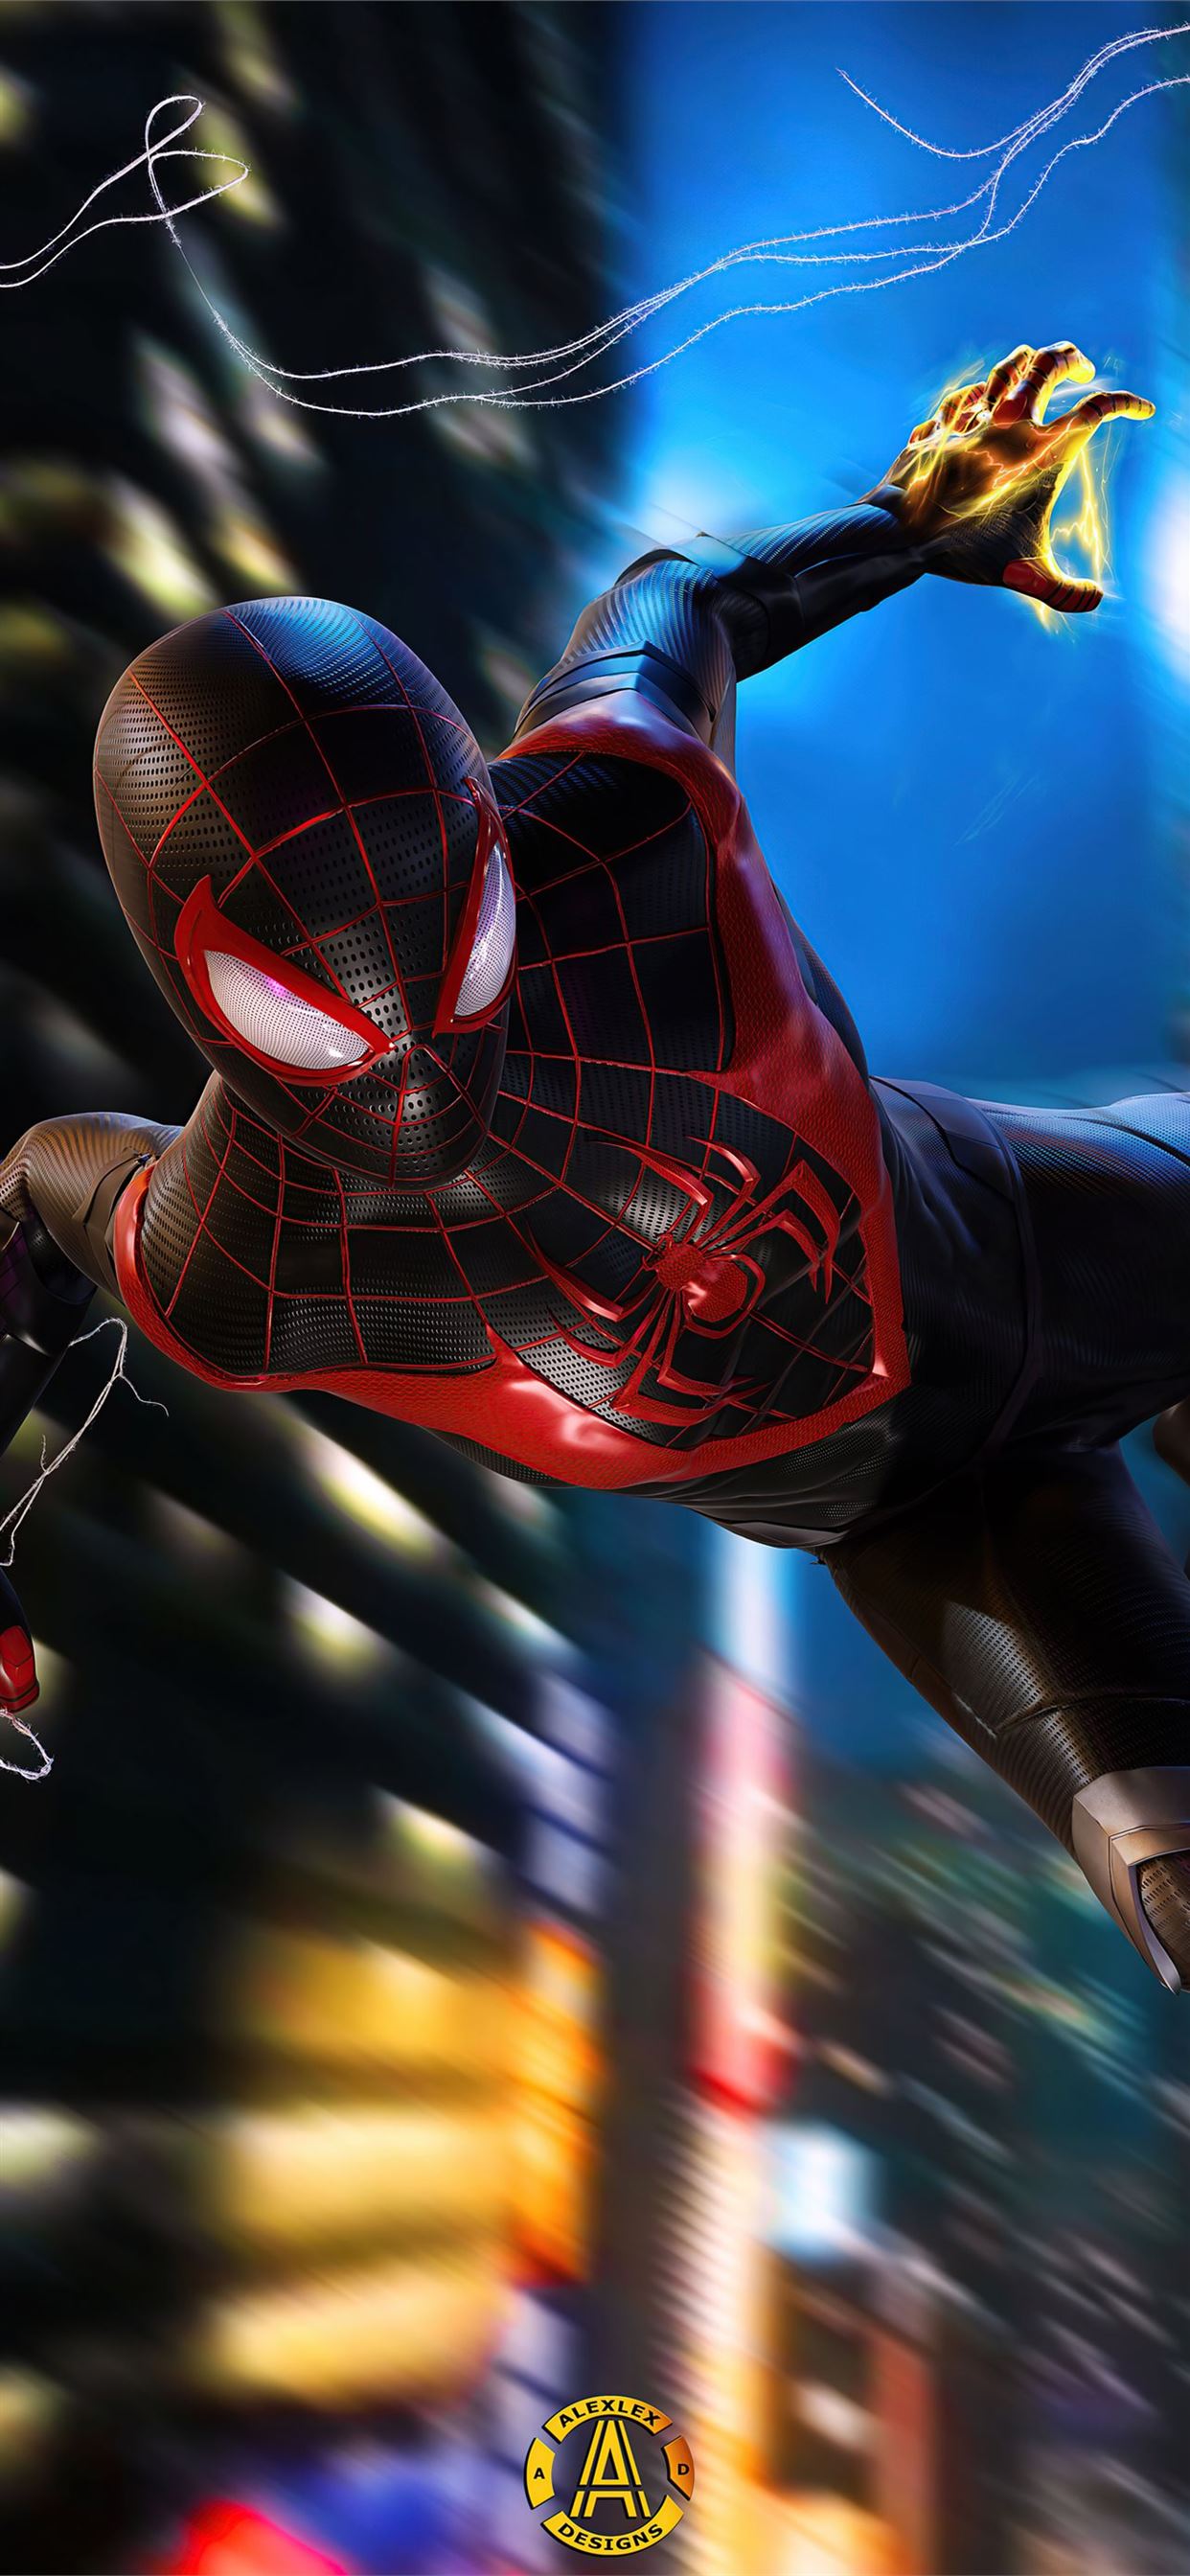 Miles morales spiderman ps iphone wallpapers free download